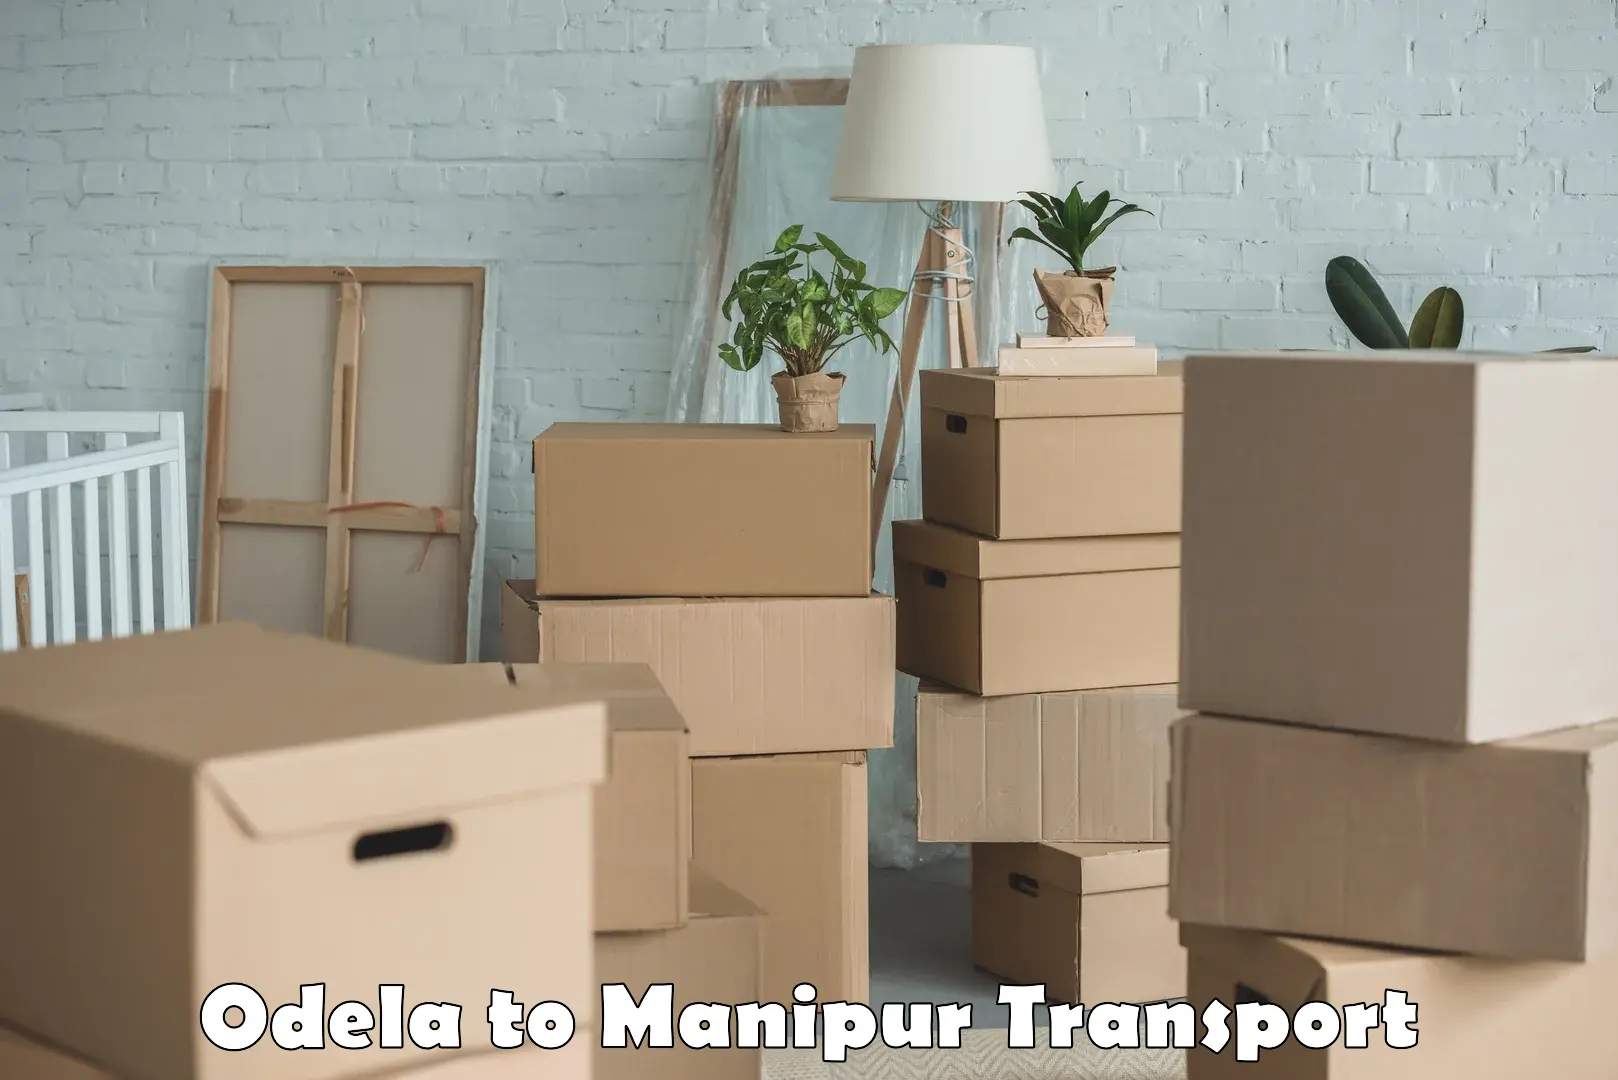 Delivery service Odela to Manipur